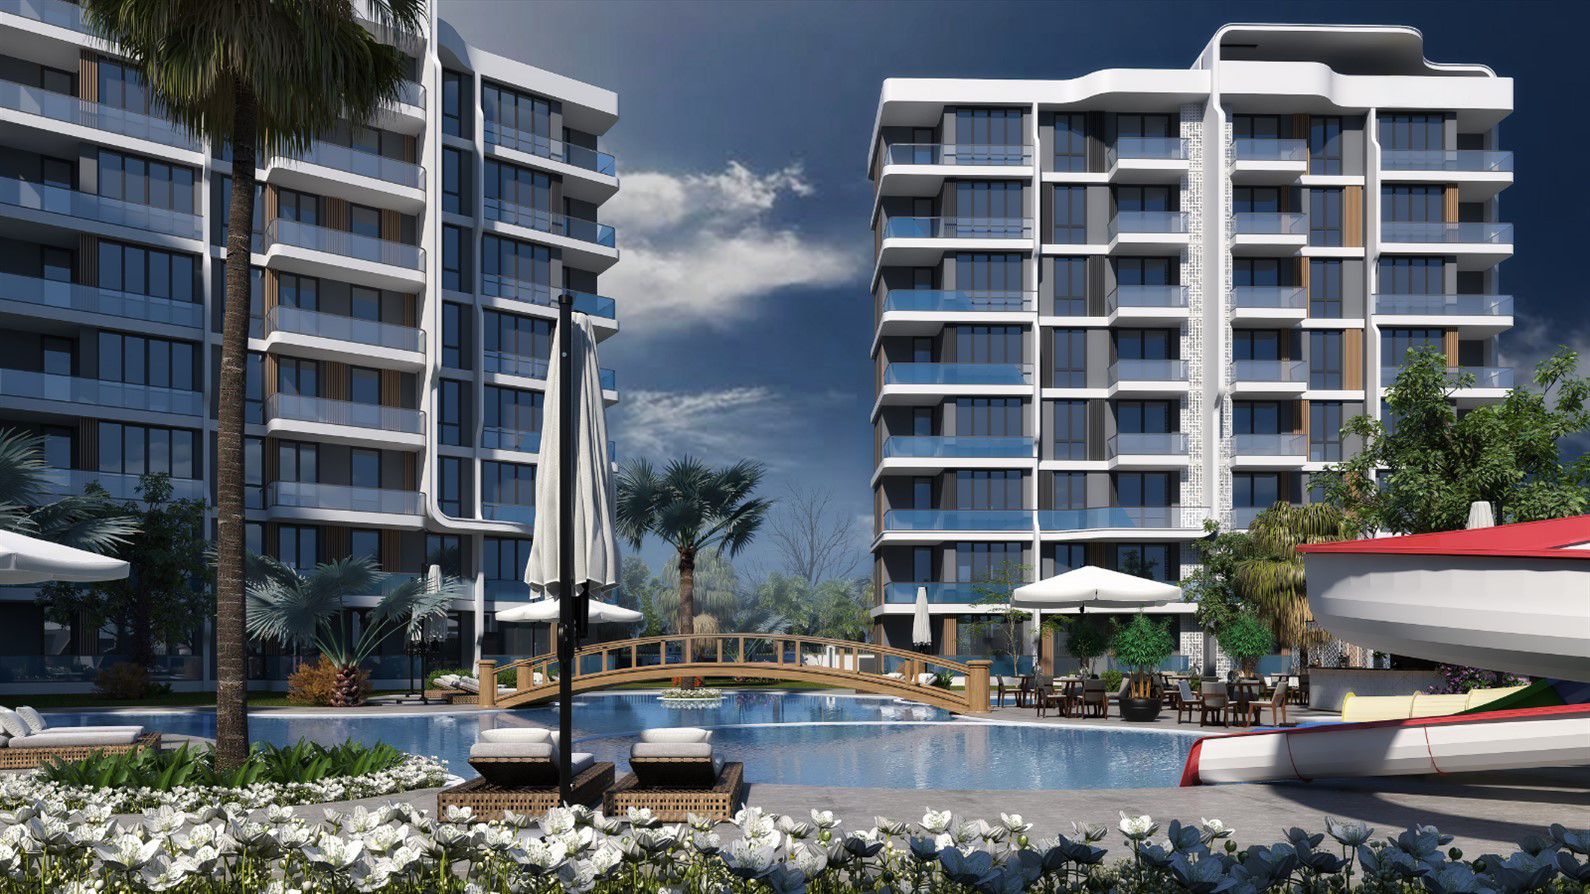 Project in the  rapidly developing district of Antalya - Altintash